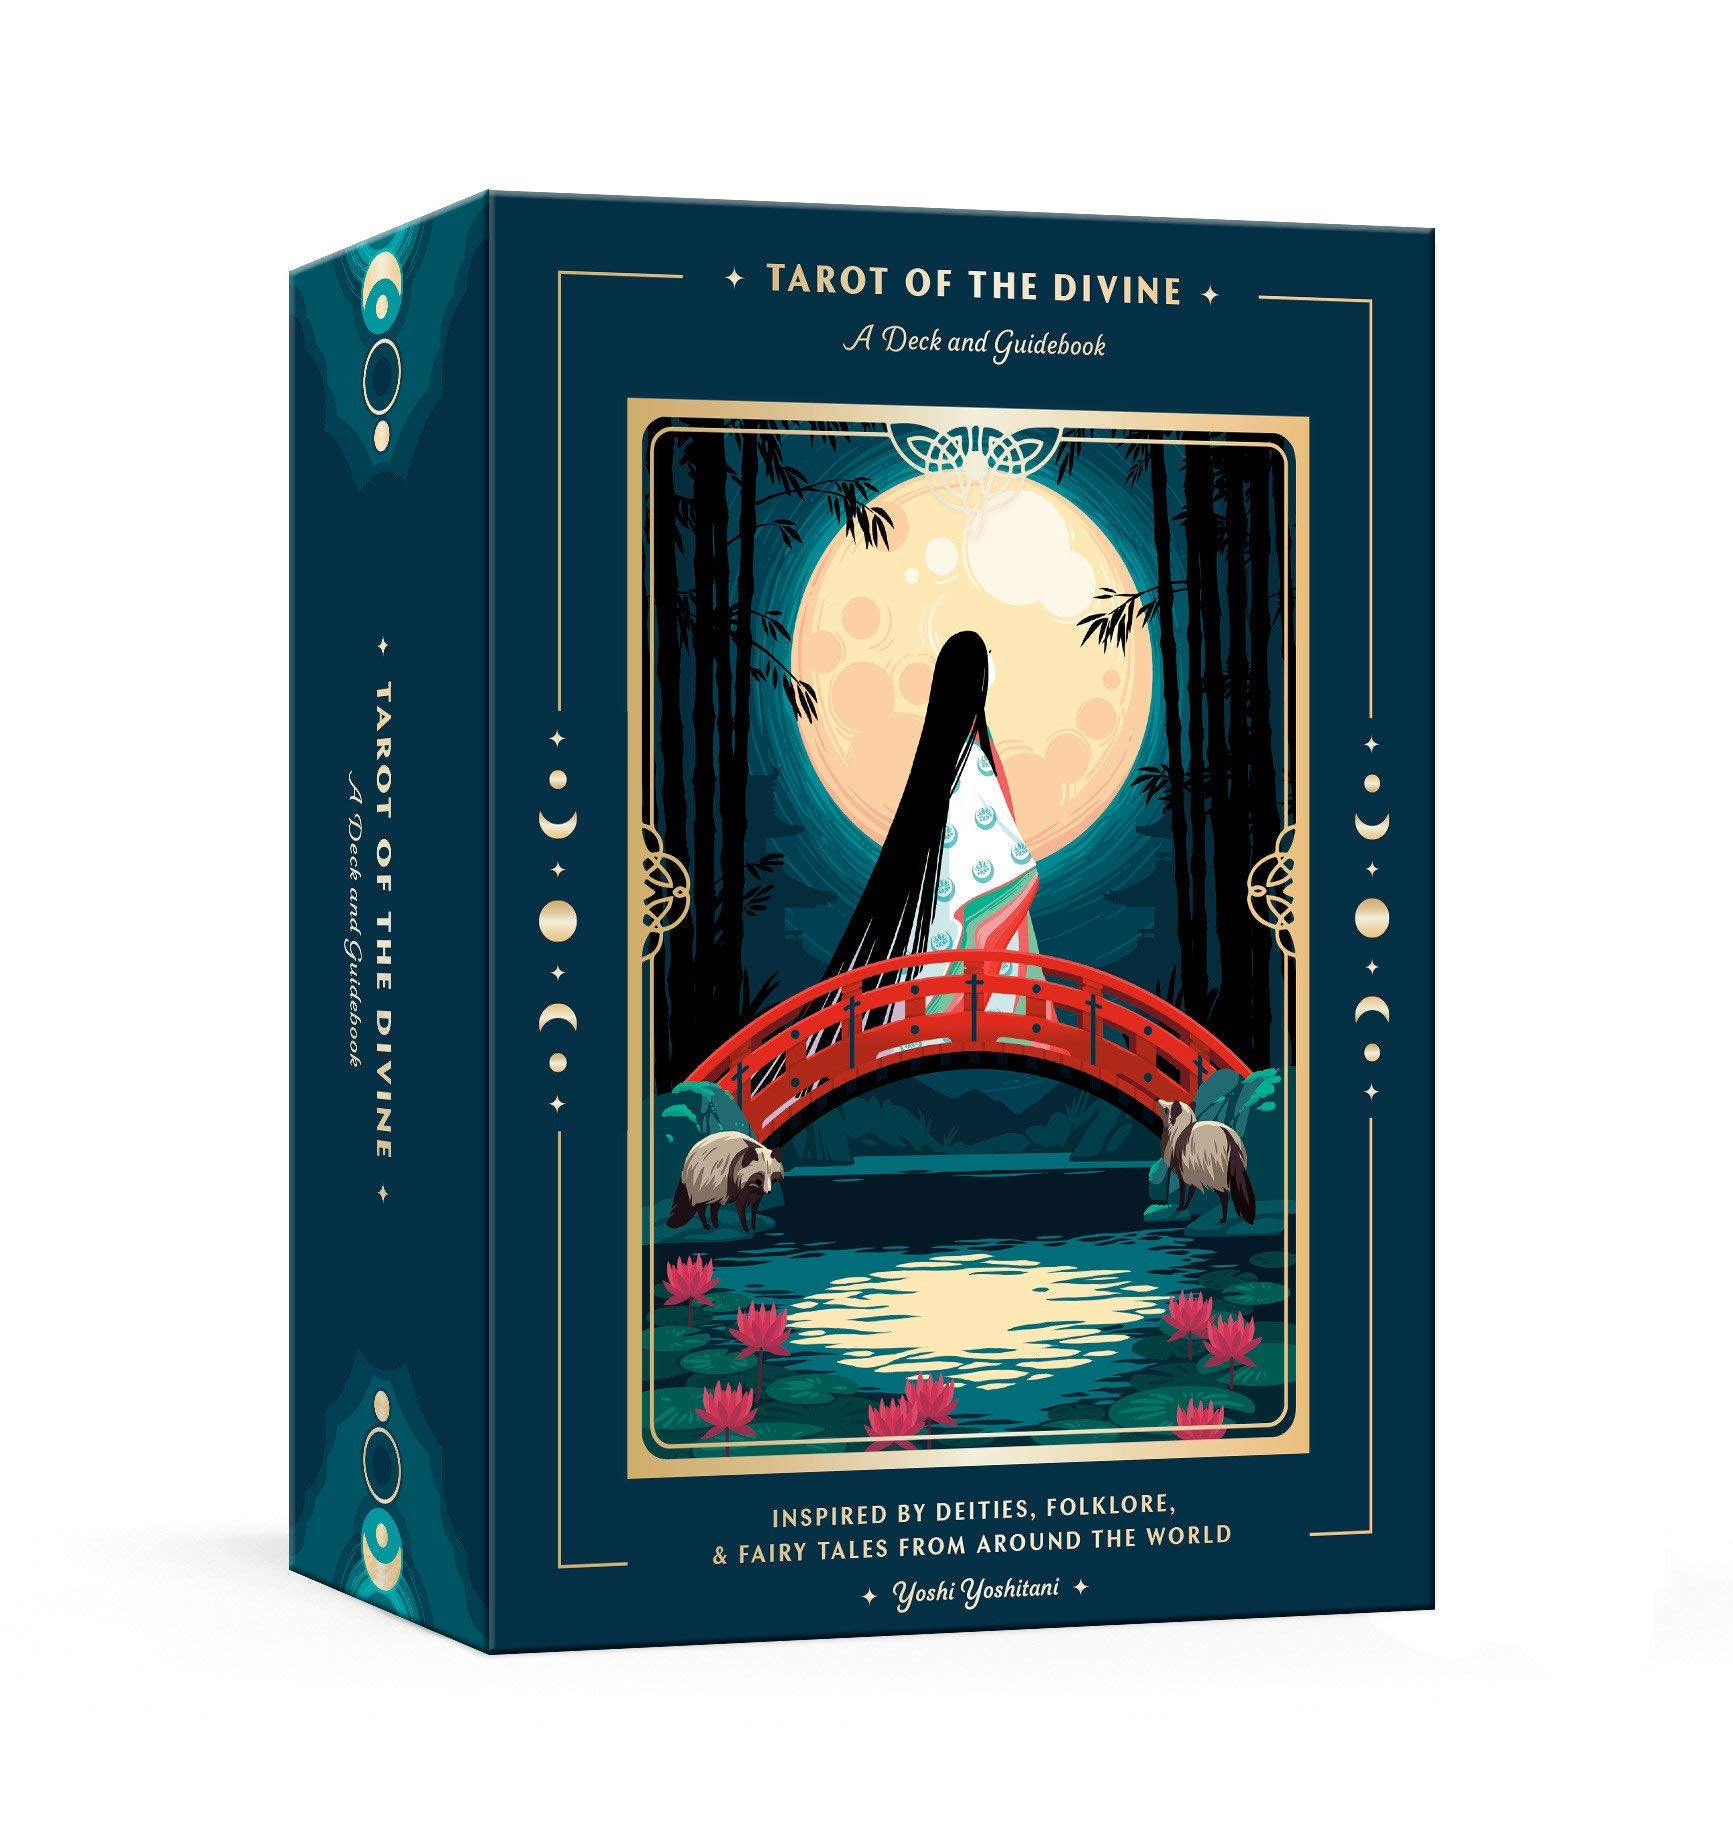 Tarot of the Divine: Inspired by Deities, Folklore, and Fairy Tales